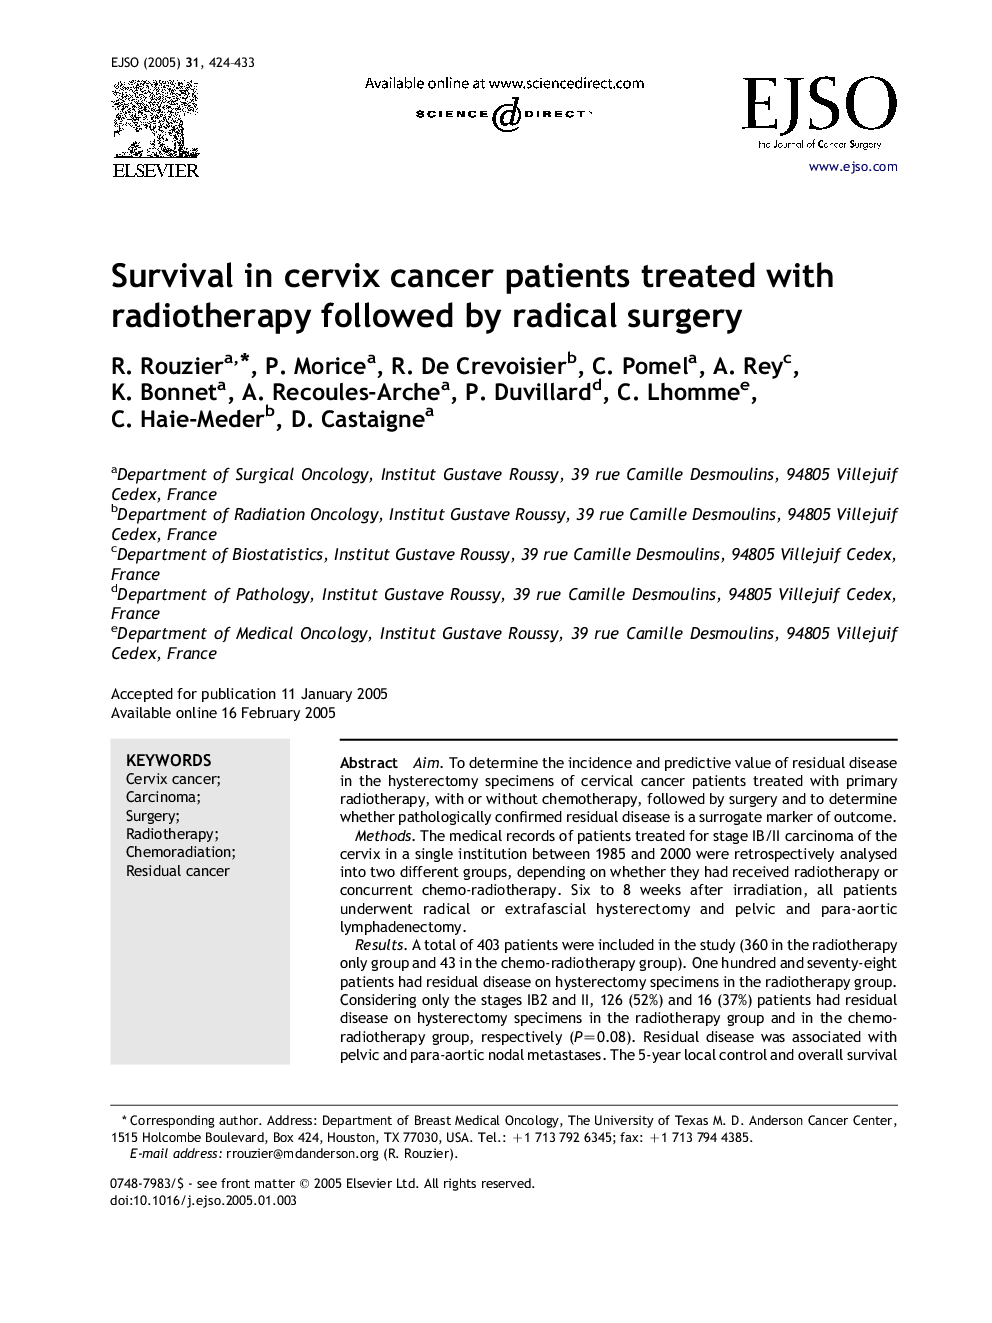 Survival in cervix cancer patients treated with radiotherapy followed by radical surgery